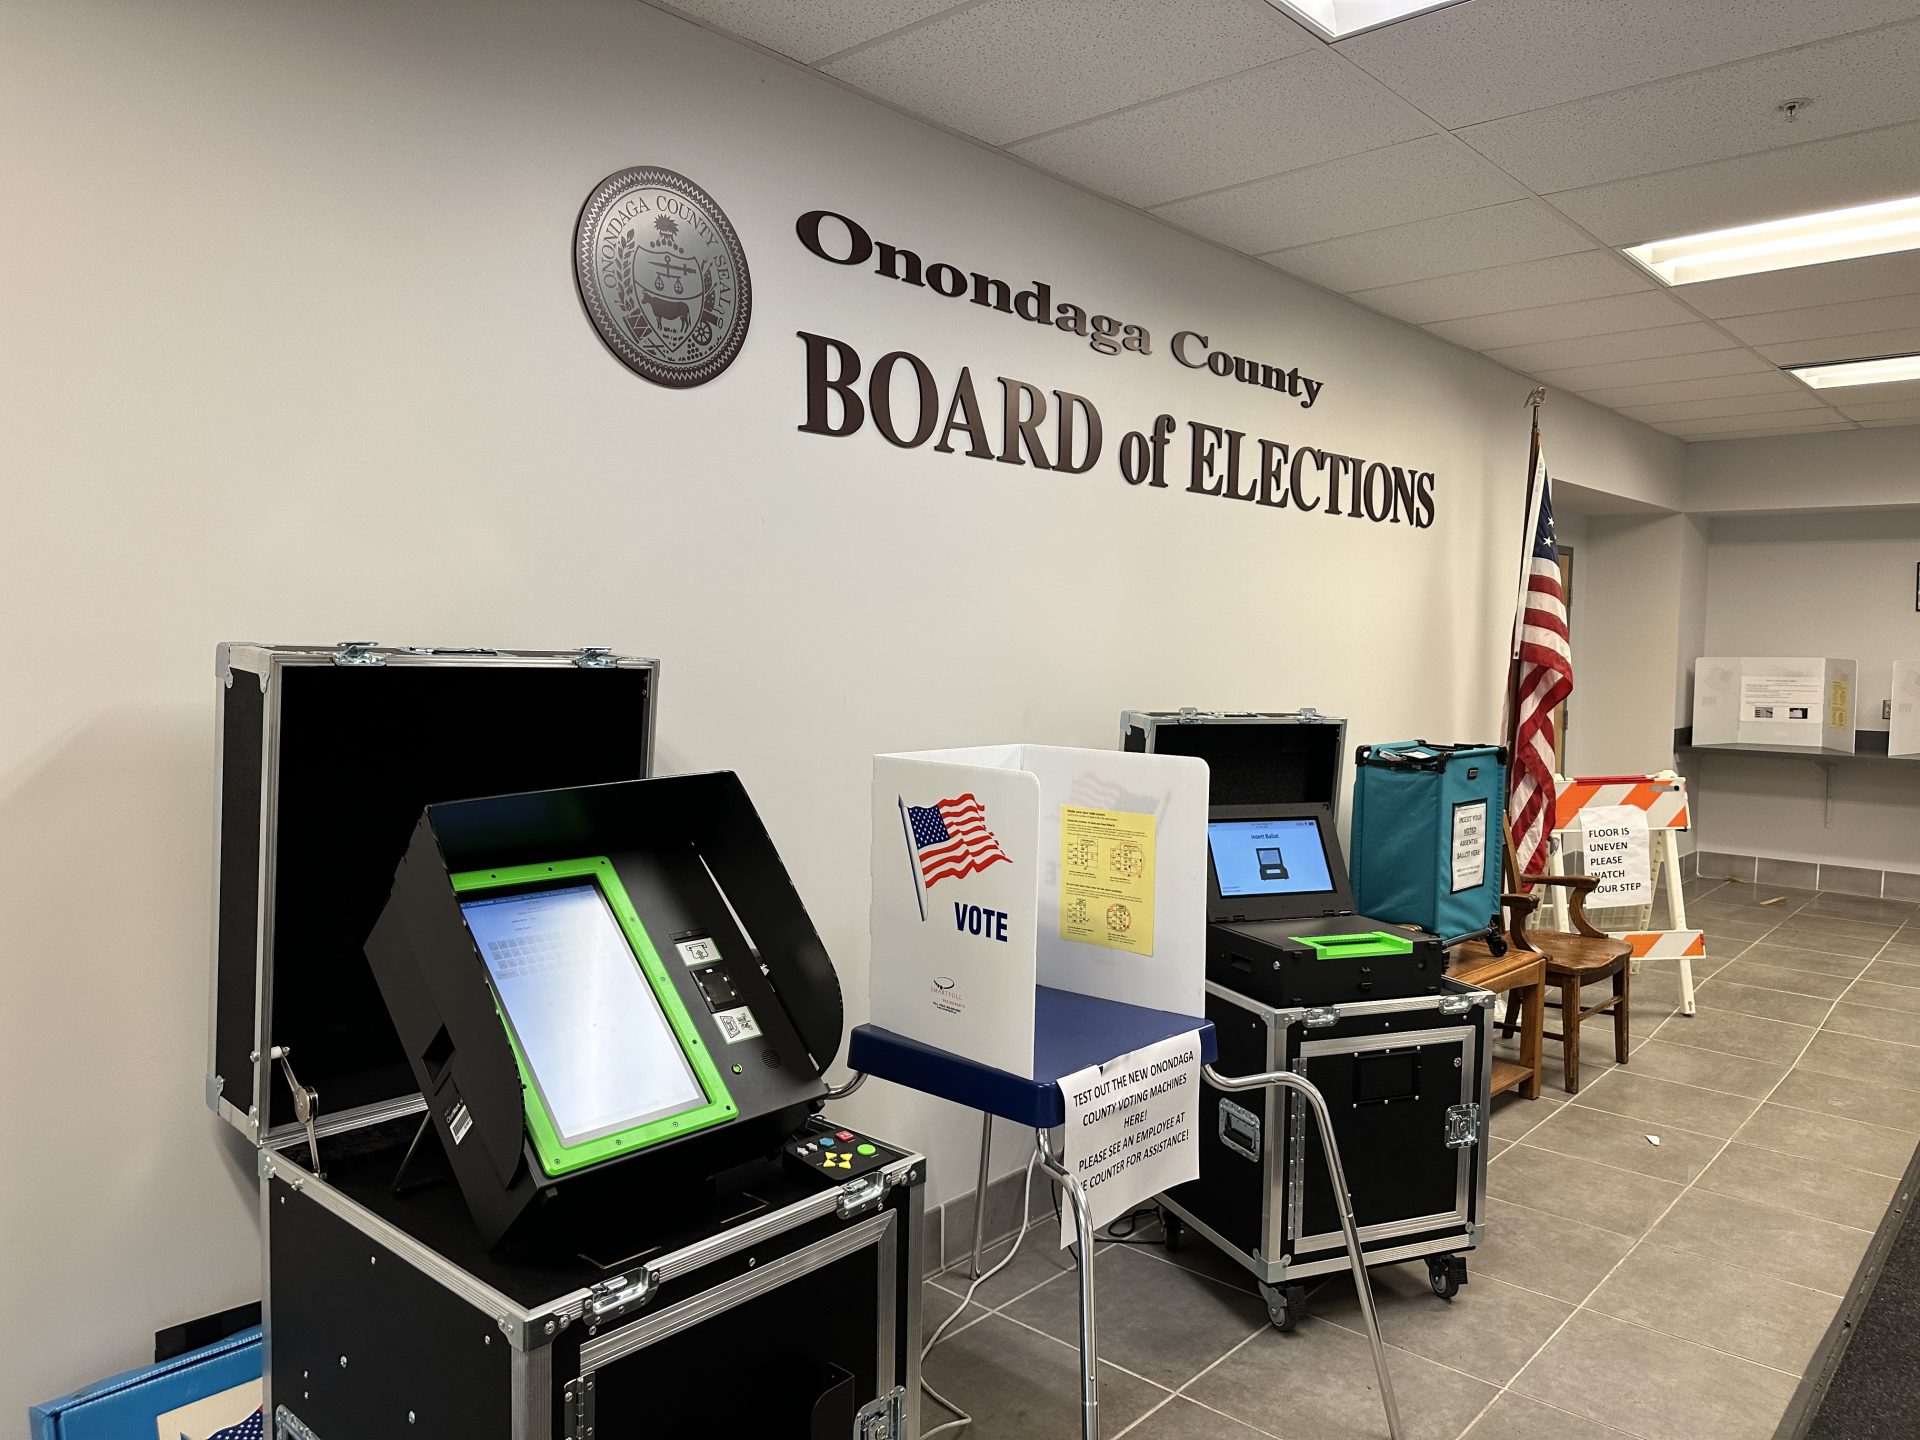 A picture of inside the Onondaga County Board of Election Office